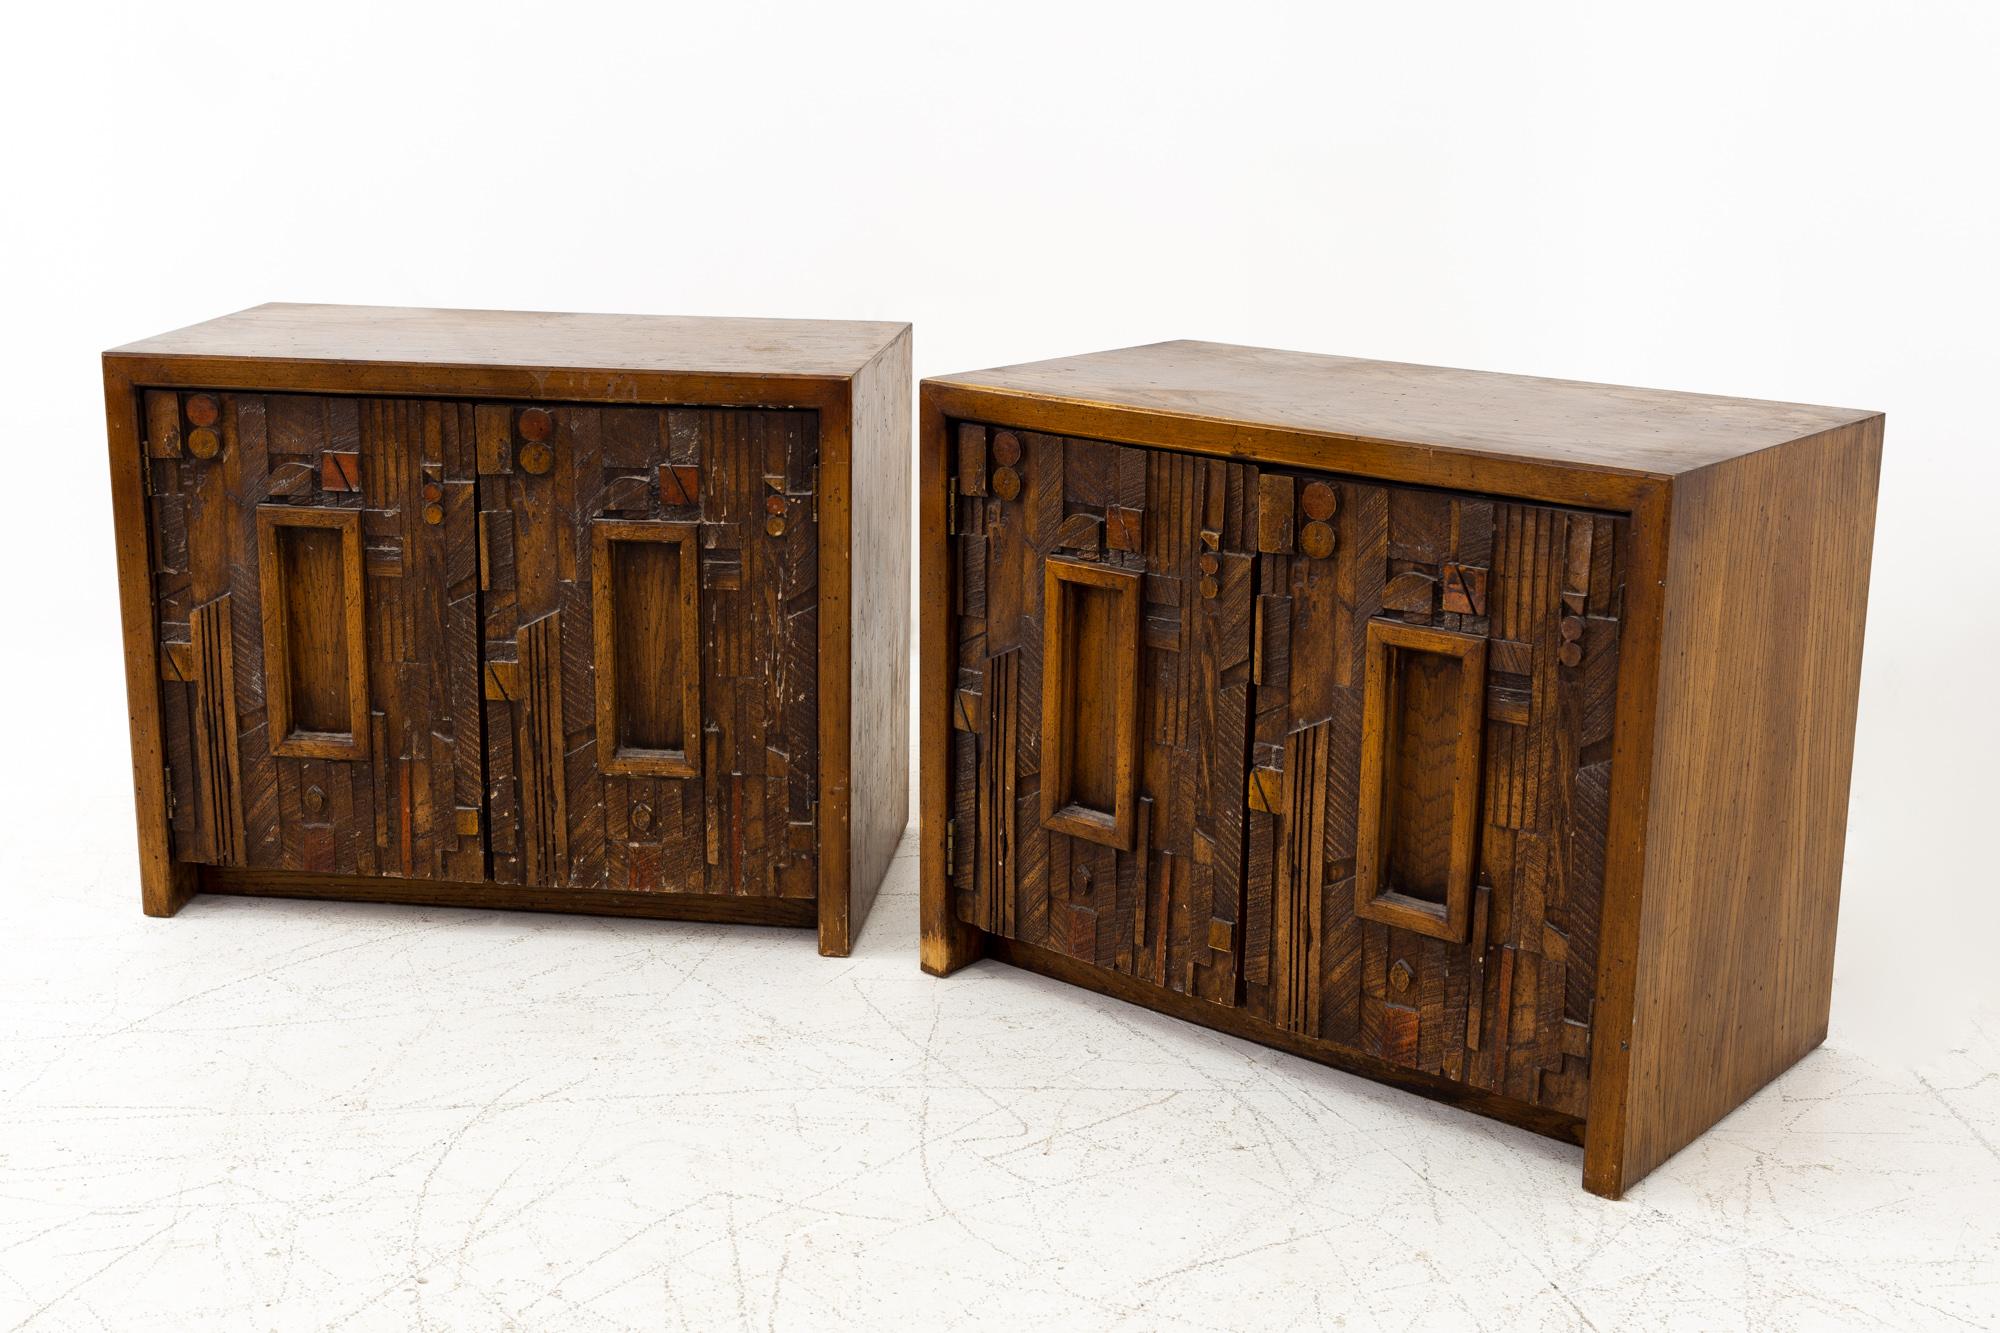 Paul Evans style Lane pueblo mid century Brutalist nightstands - set of 2
These nightstands are 28 wide x 16 deep x 22 inches high

All pieces of furniture can be had in what we call restored vintage condition. That means the piece is restored